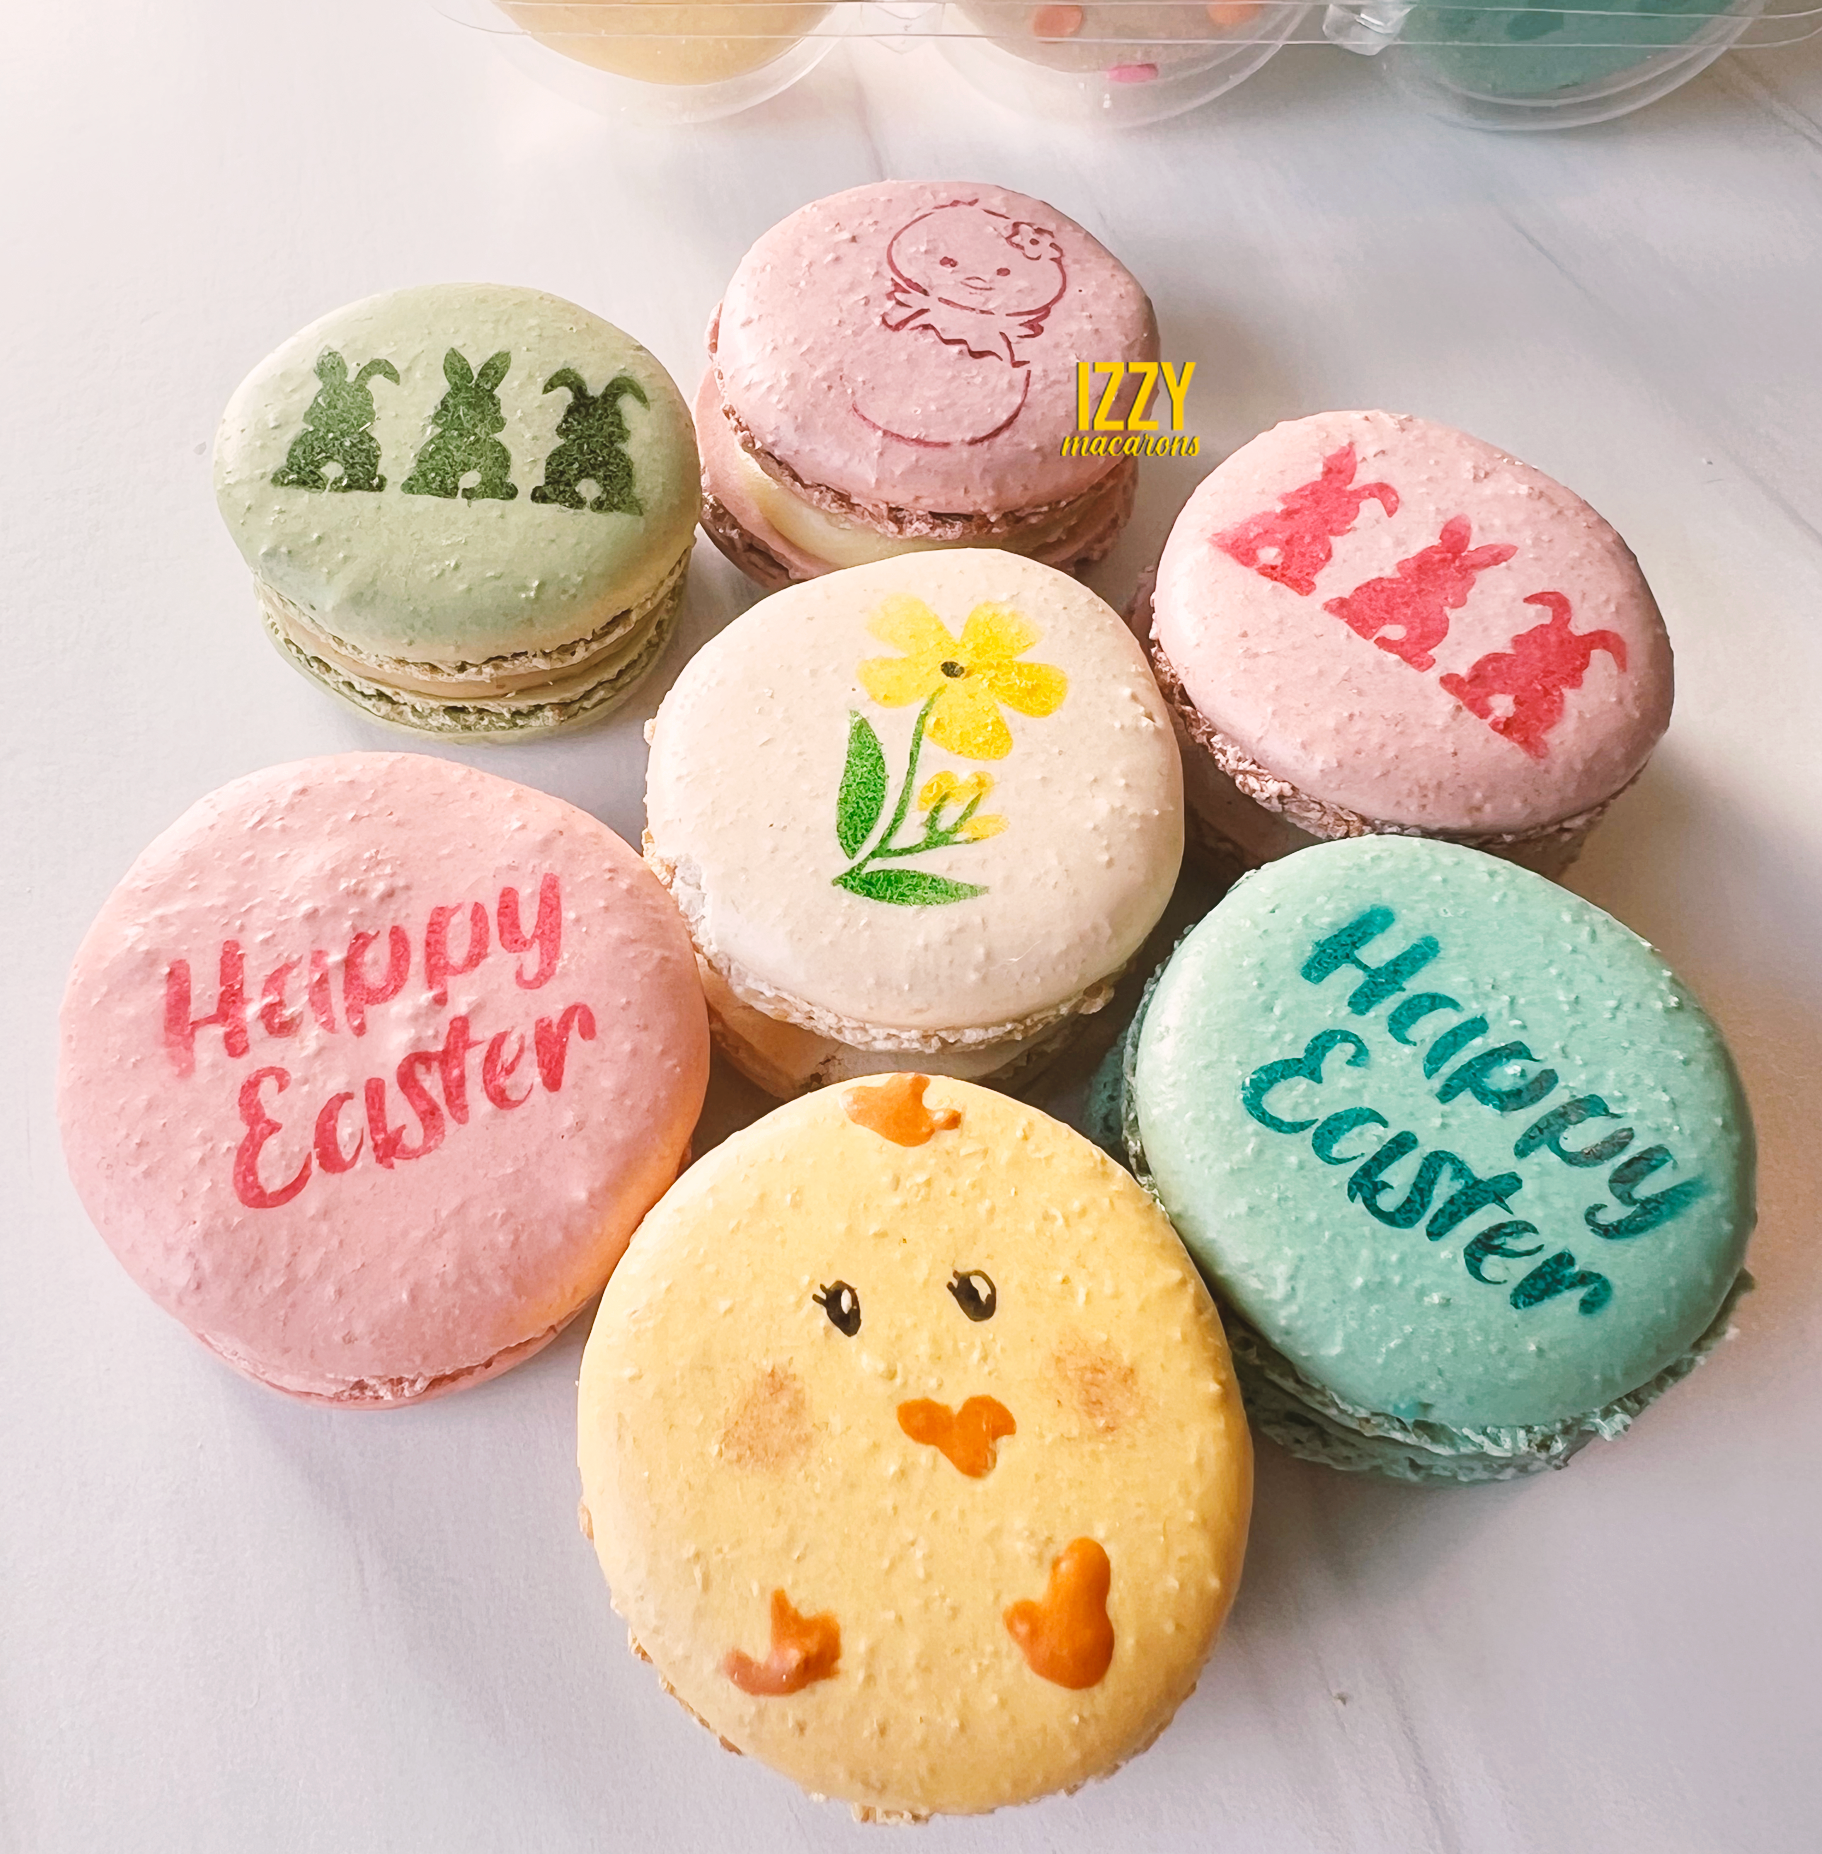 Easter Macarons - Assorted Prints/Colors - Izzy Macarons